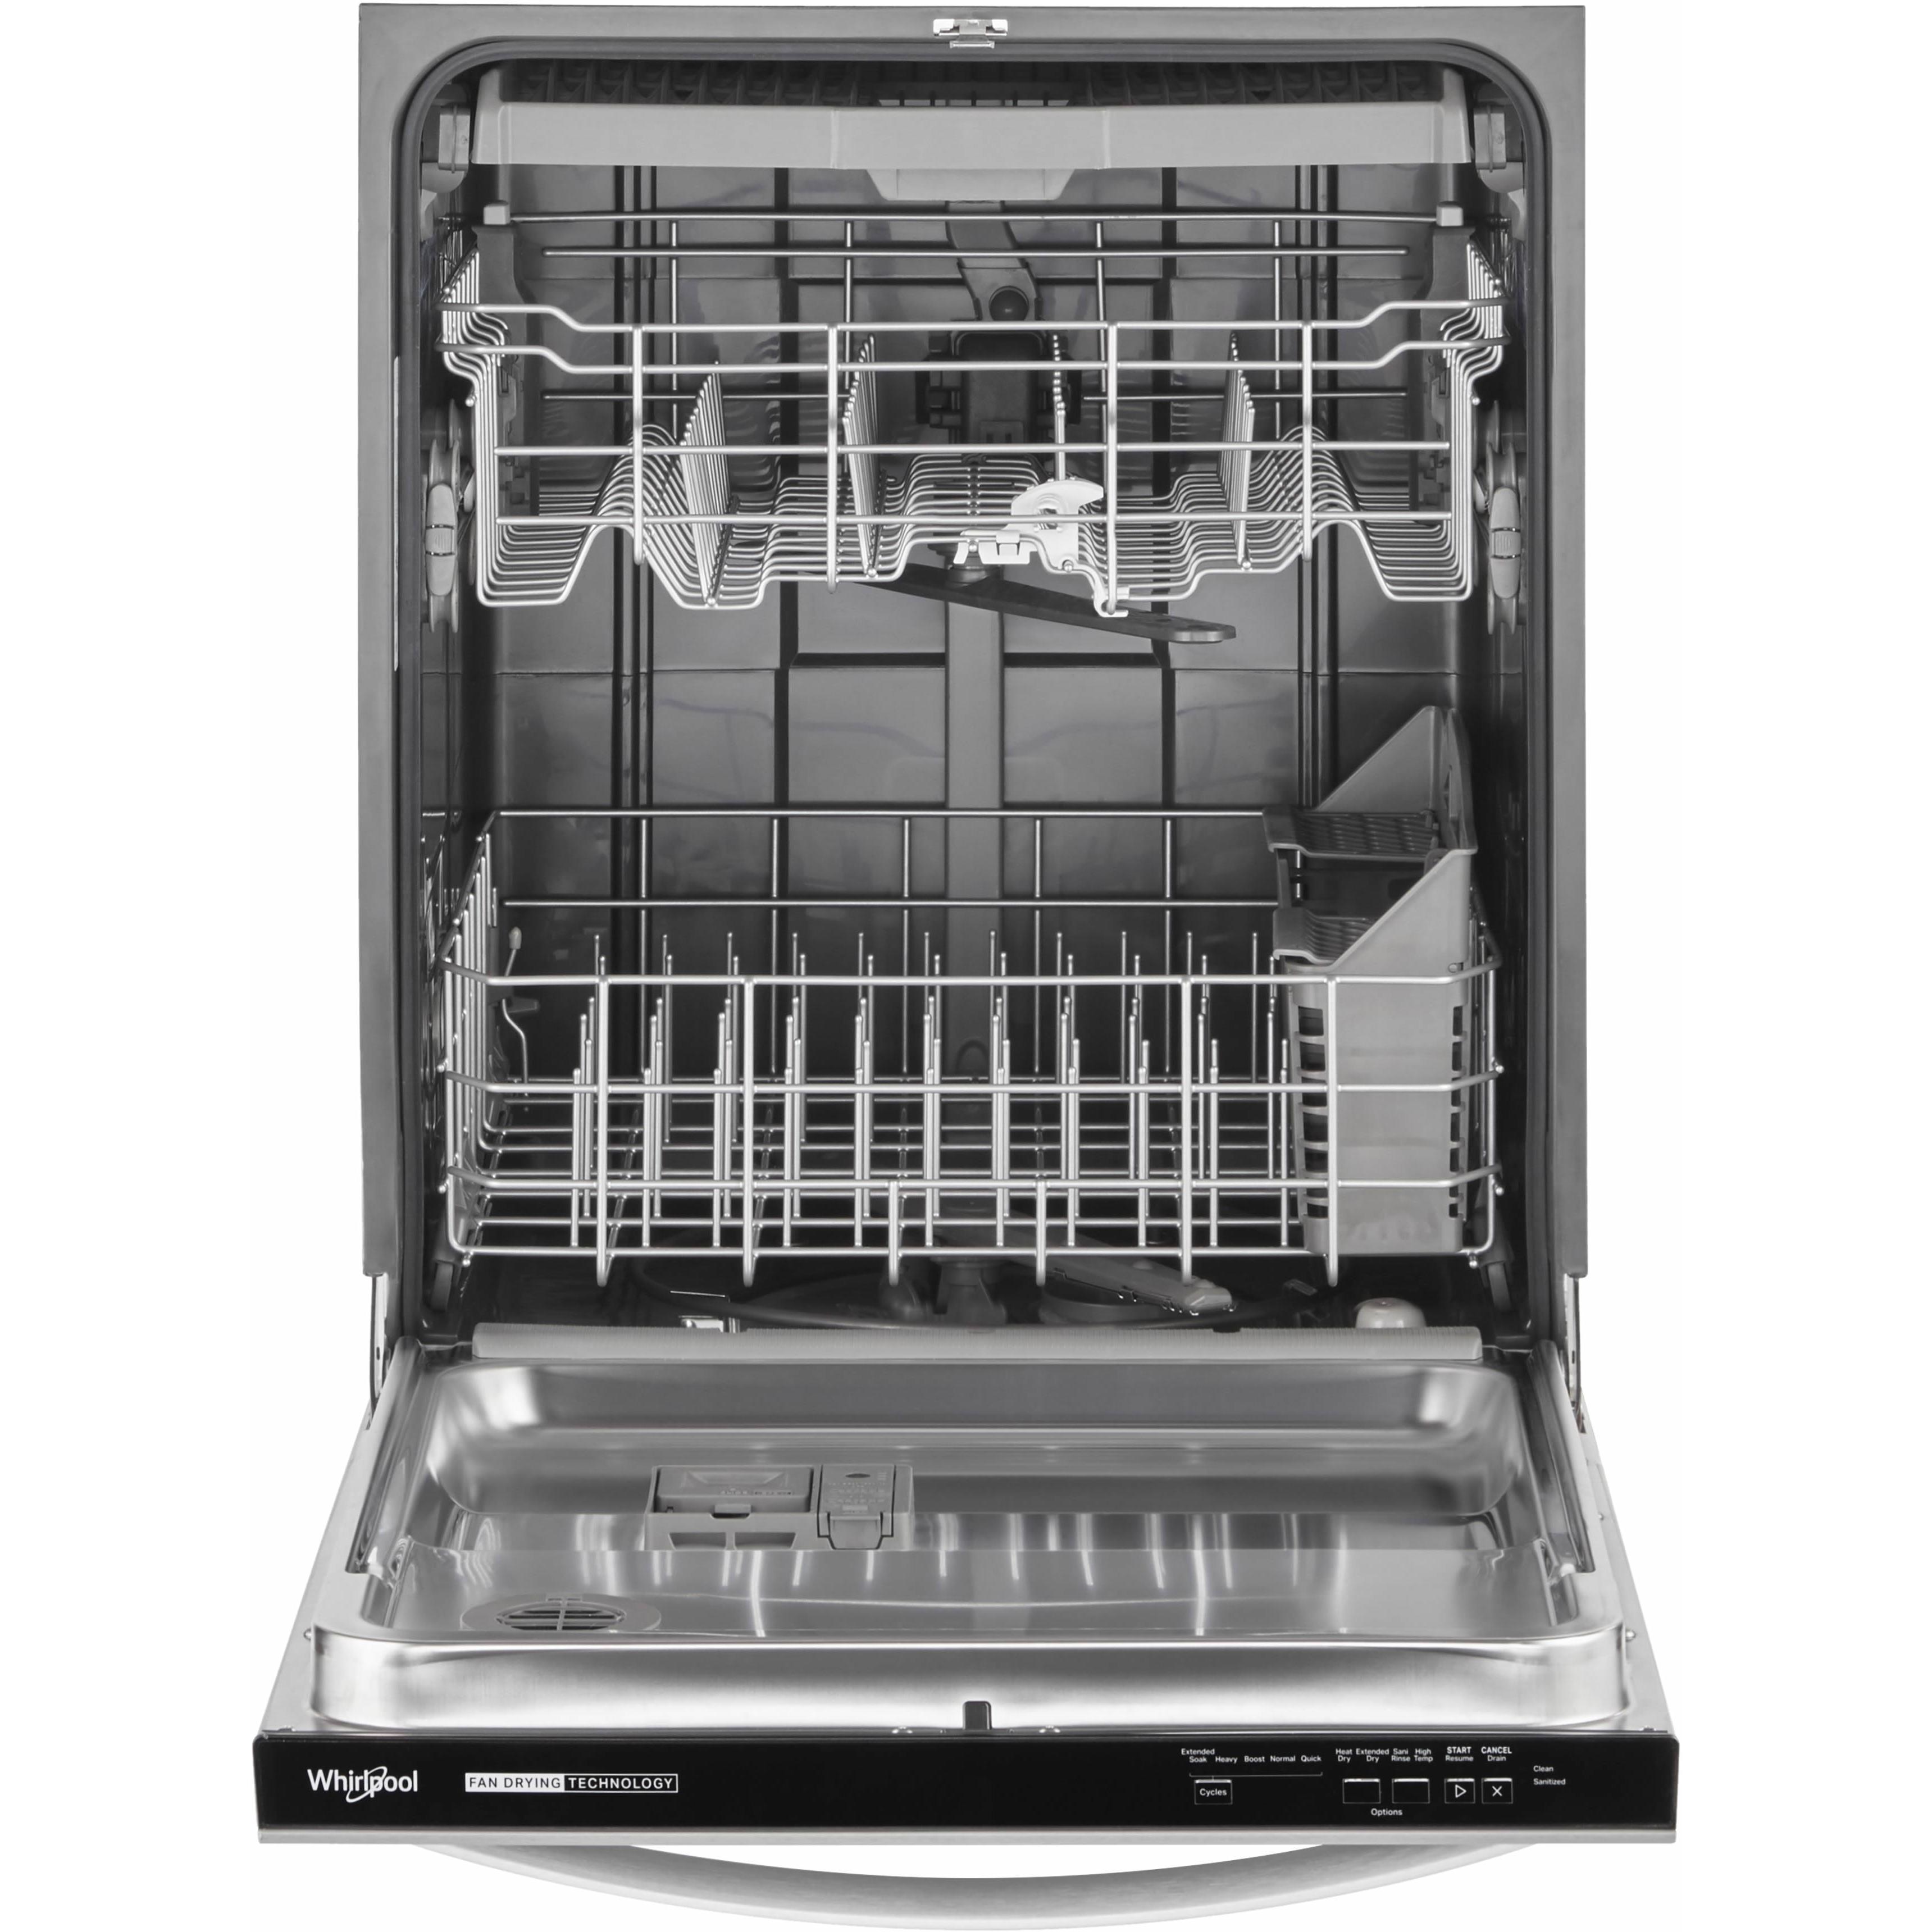 Whirlpool 24-inch Built-in Dishwasher with Boost Cycle WDT730HAMZ